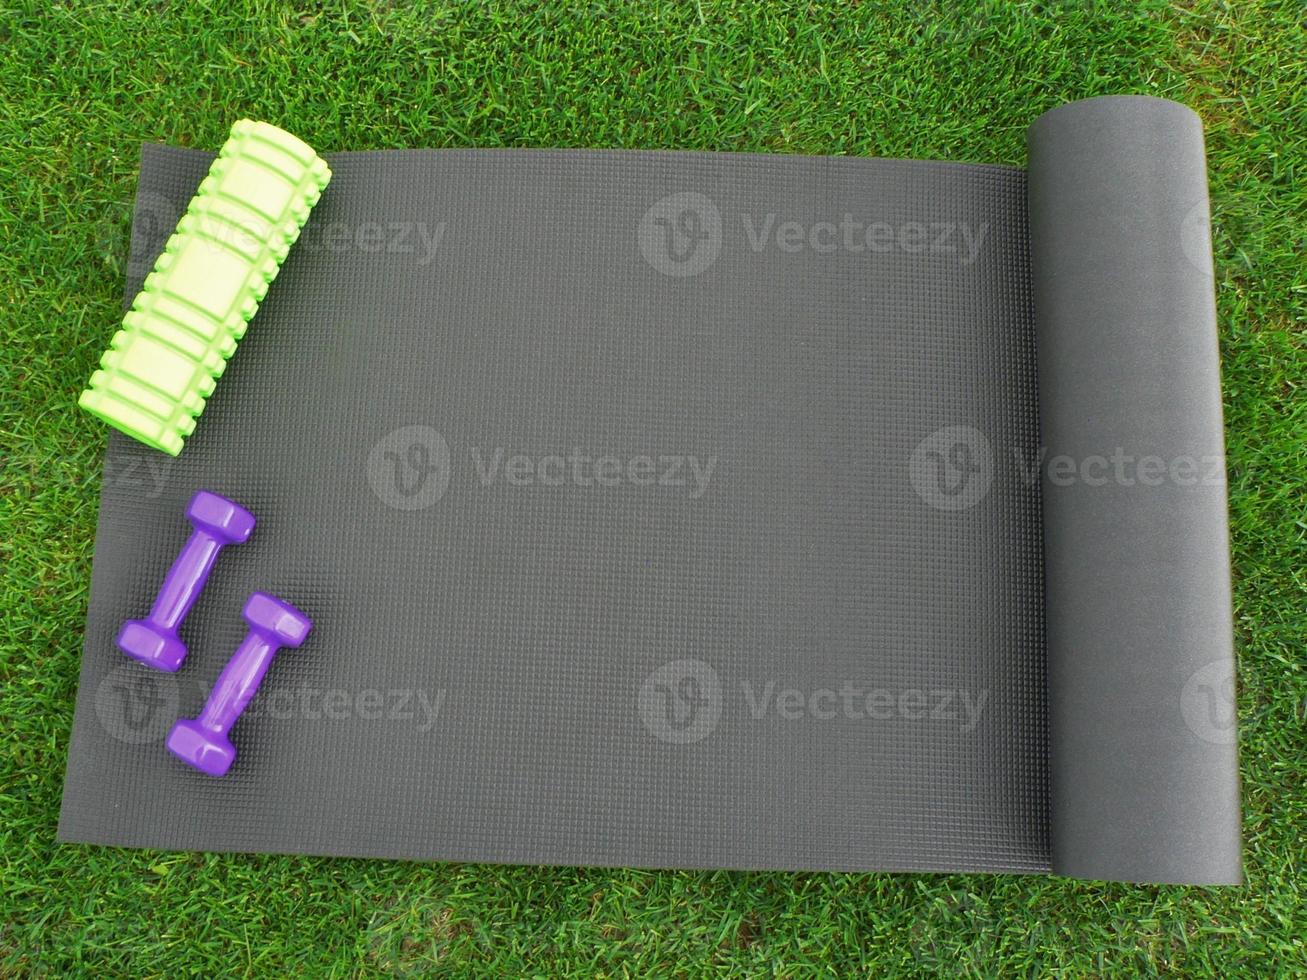 Keeping fit and exercising outdoor or at home. Purple dumbbells, green foam roll on a yoga mat on green grass lawn in a backyard or park. Healthy lifestyle. Copy space. photo